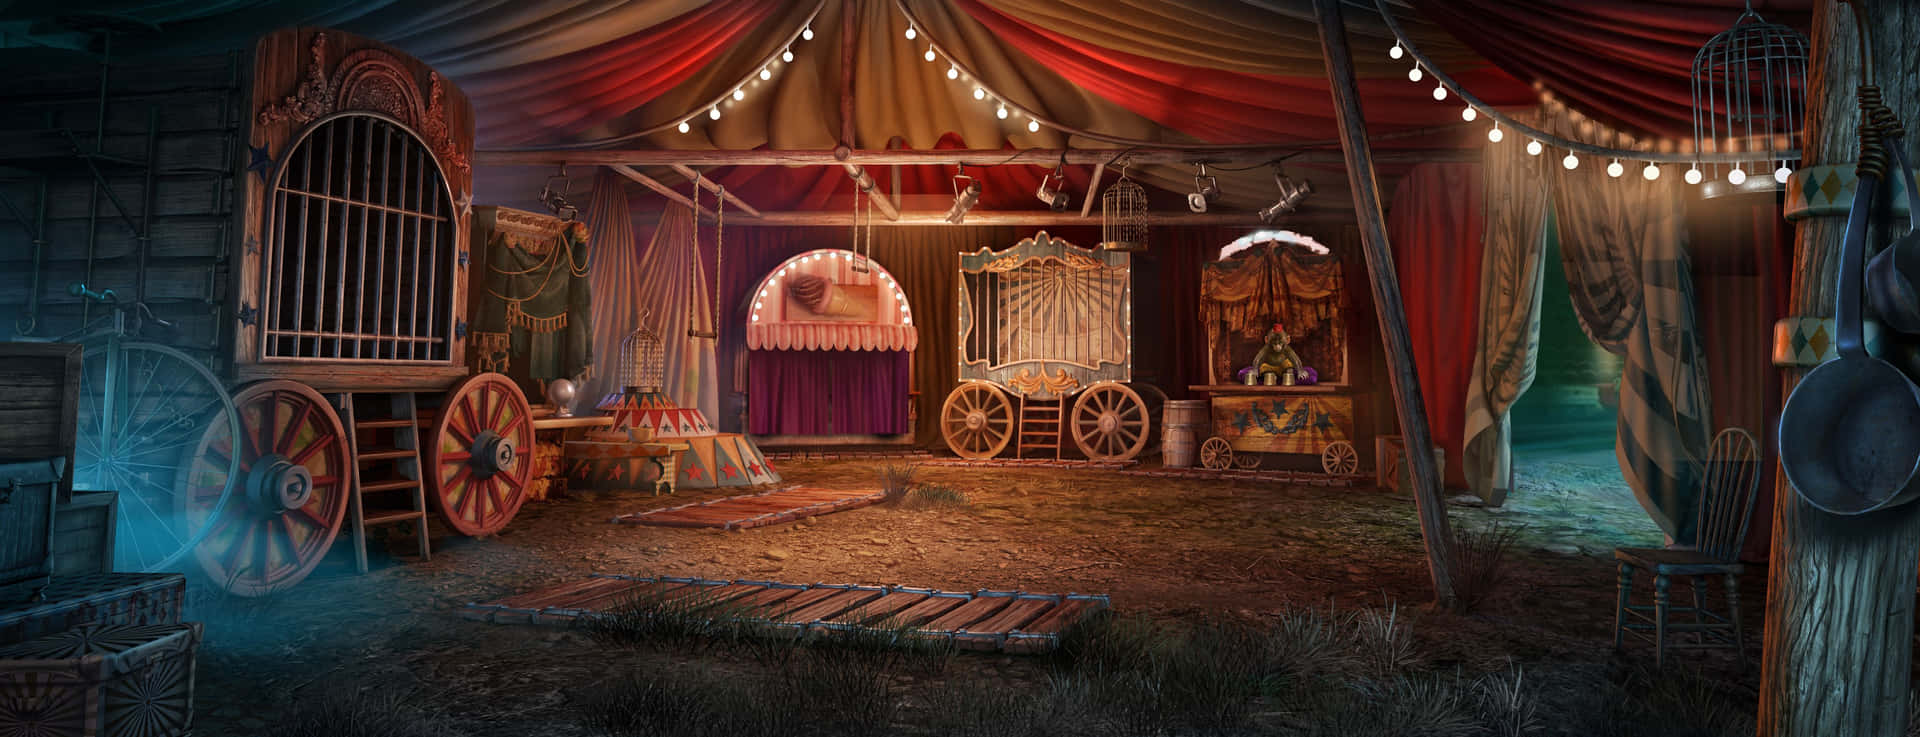 Join the fun and excitement of the Circus!